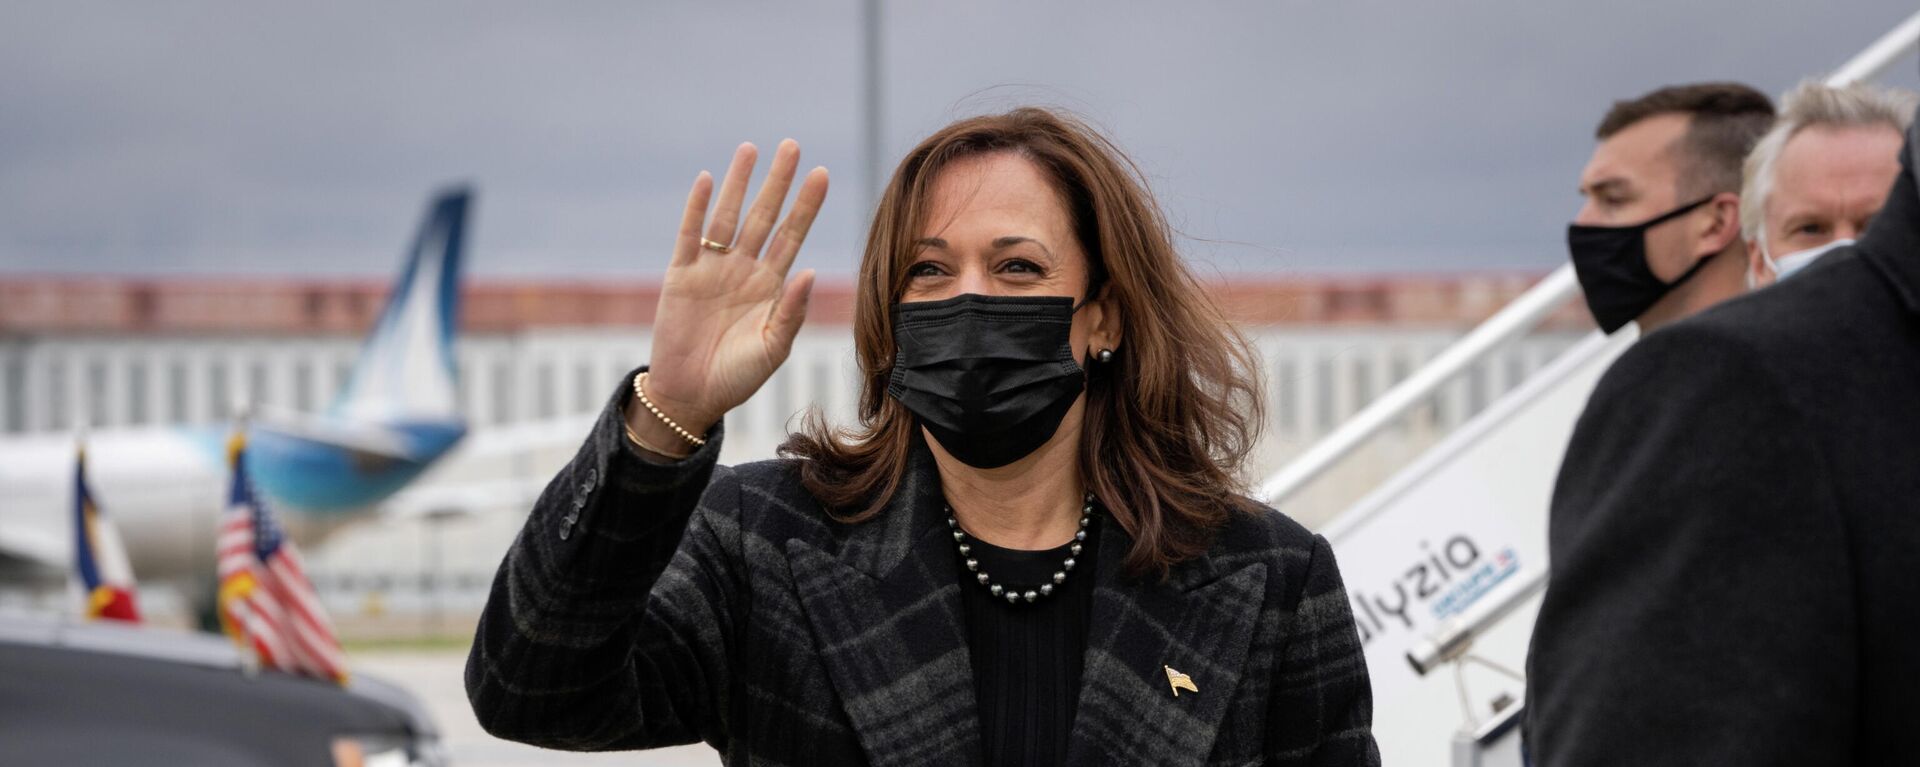 U.S. Vice President Kamala Harris waves to reporters before boarding Air Force Two en route to Joint Base Andrews, at Paris-Orly Airport in Orly, France, November 13, 2021. - Sputnik International, 1920, 18.11.2021